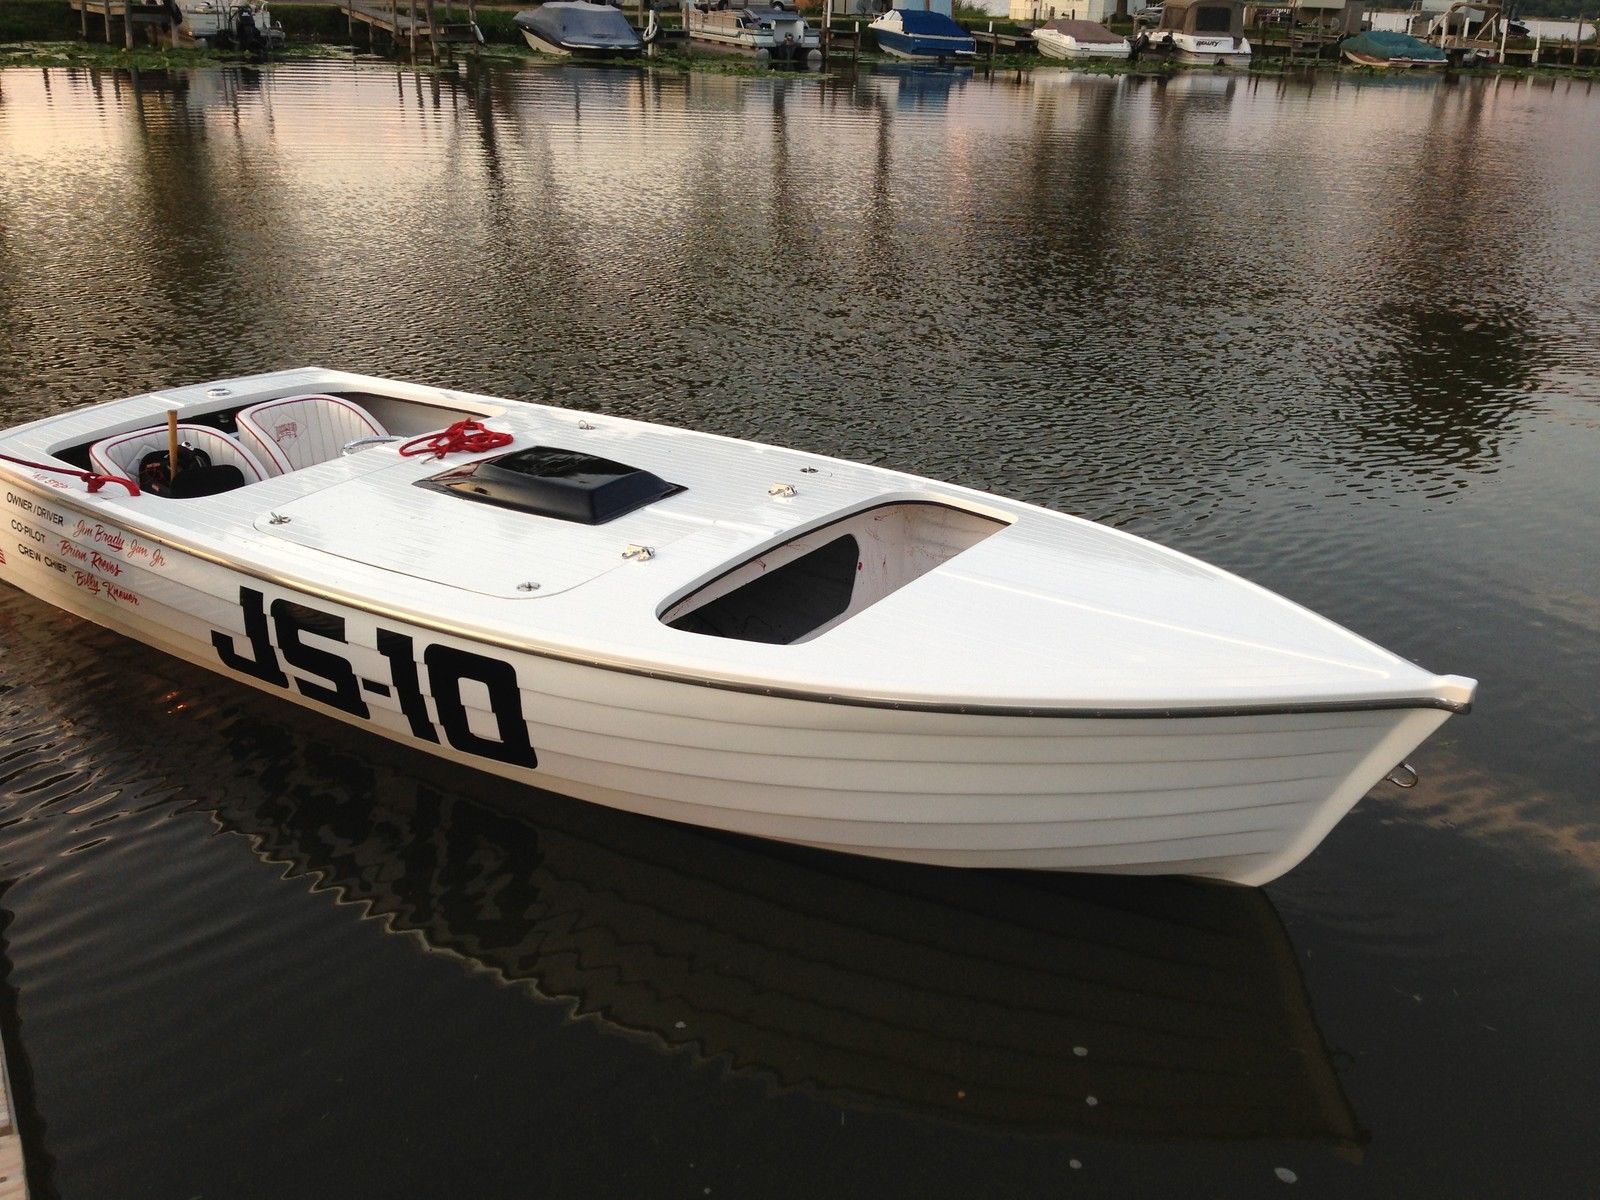 jersey speed skiff js-10 1972 for sale for ,500 - boats